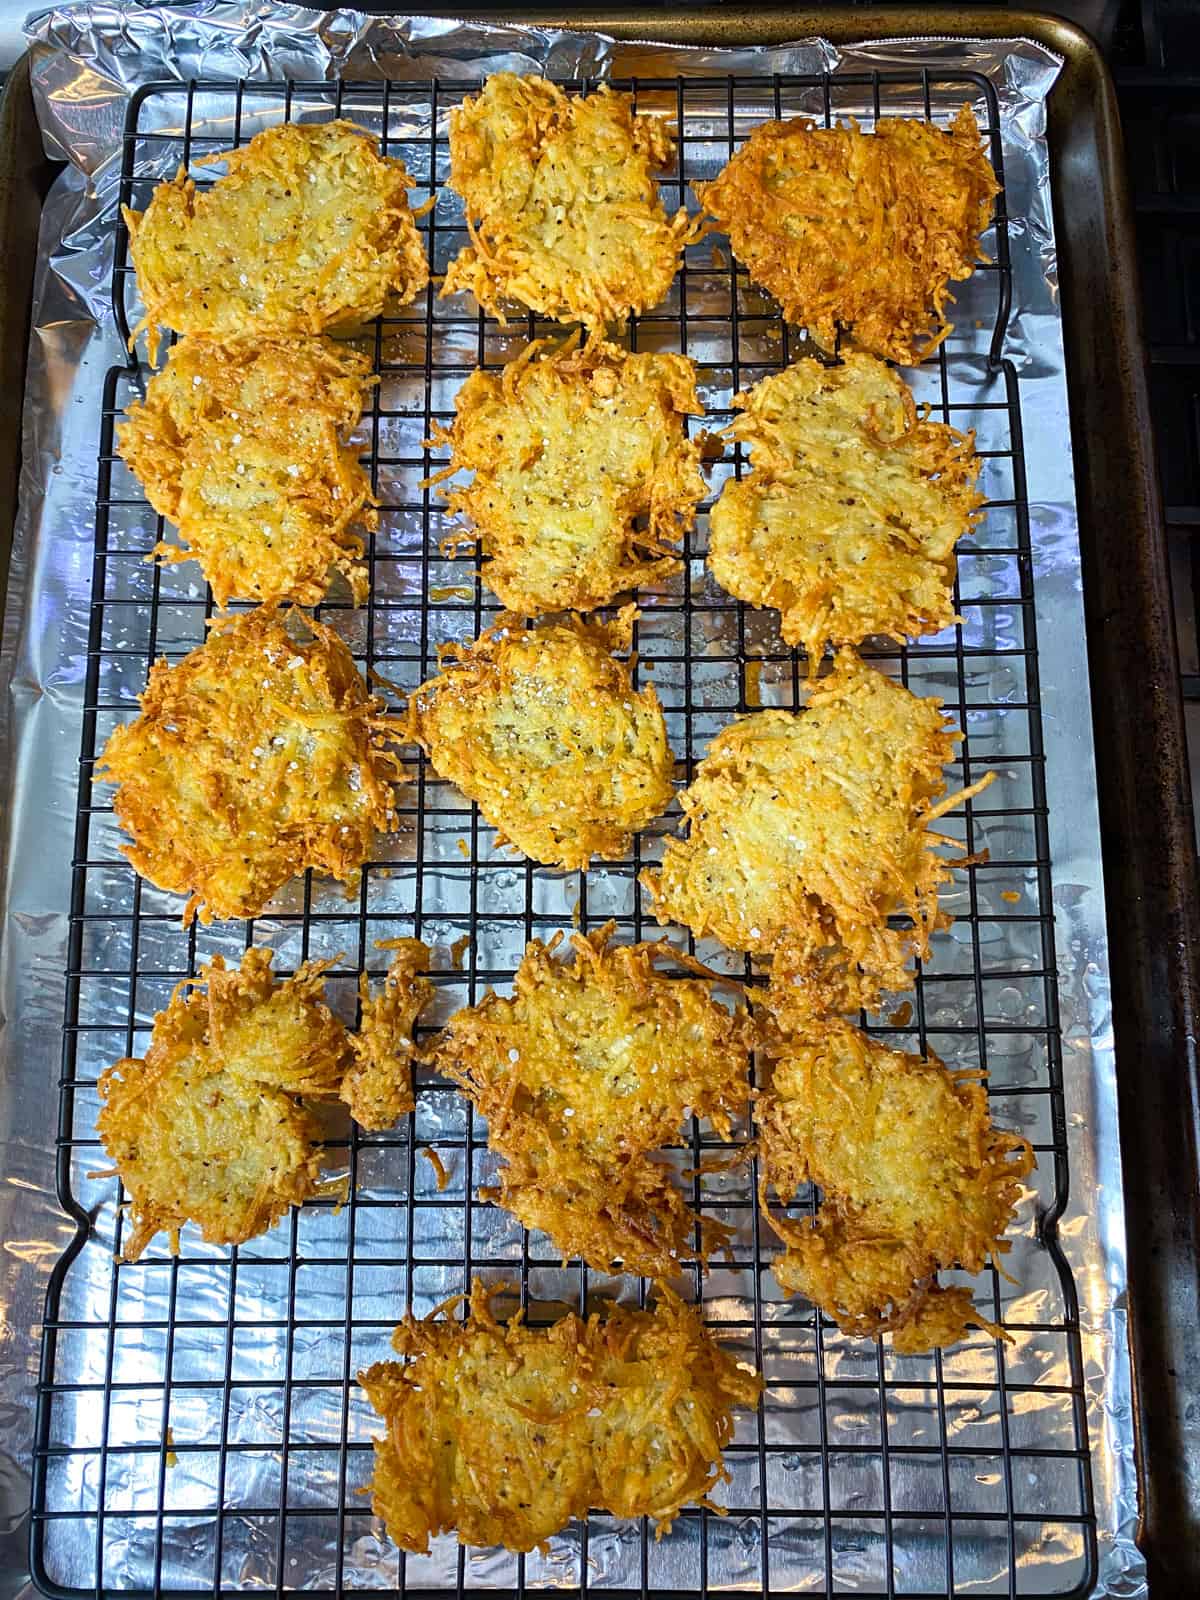 Transfer the fried celery root latkes to a wire rack to drain excess oil.